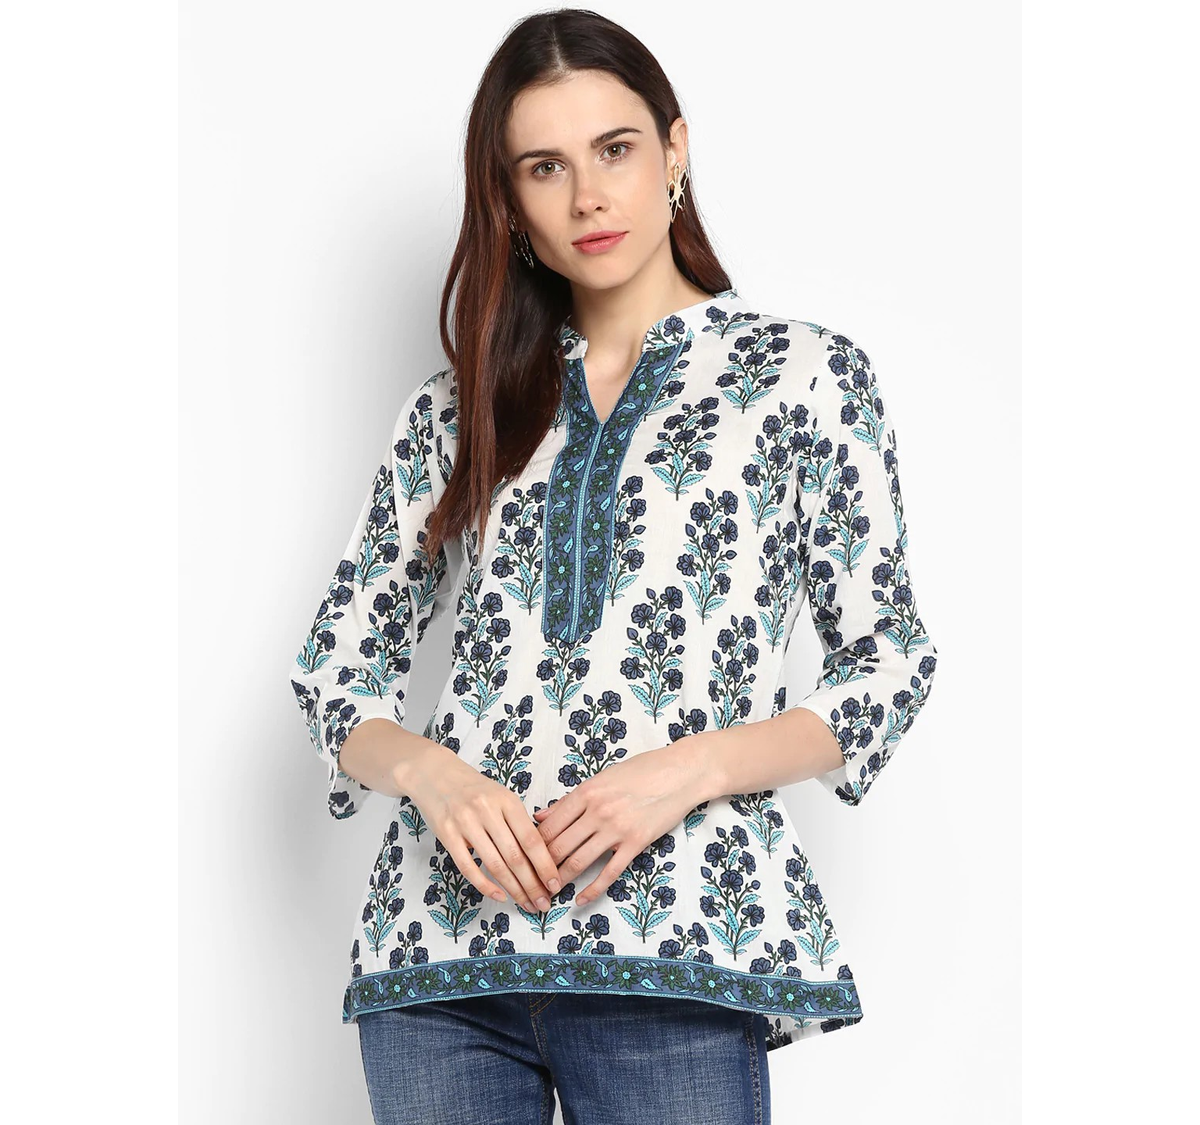 Women's  Off-White Printed A-Line Top1 - Wahe-NOOR